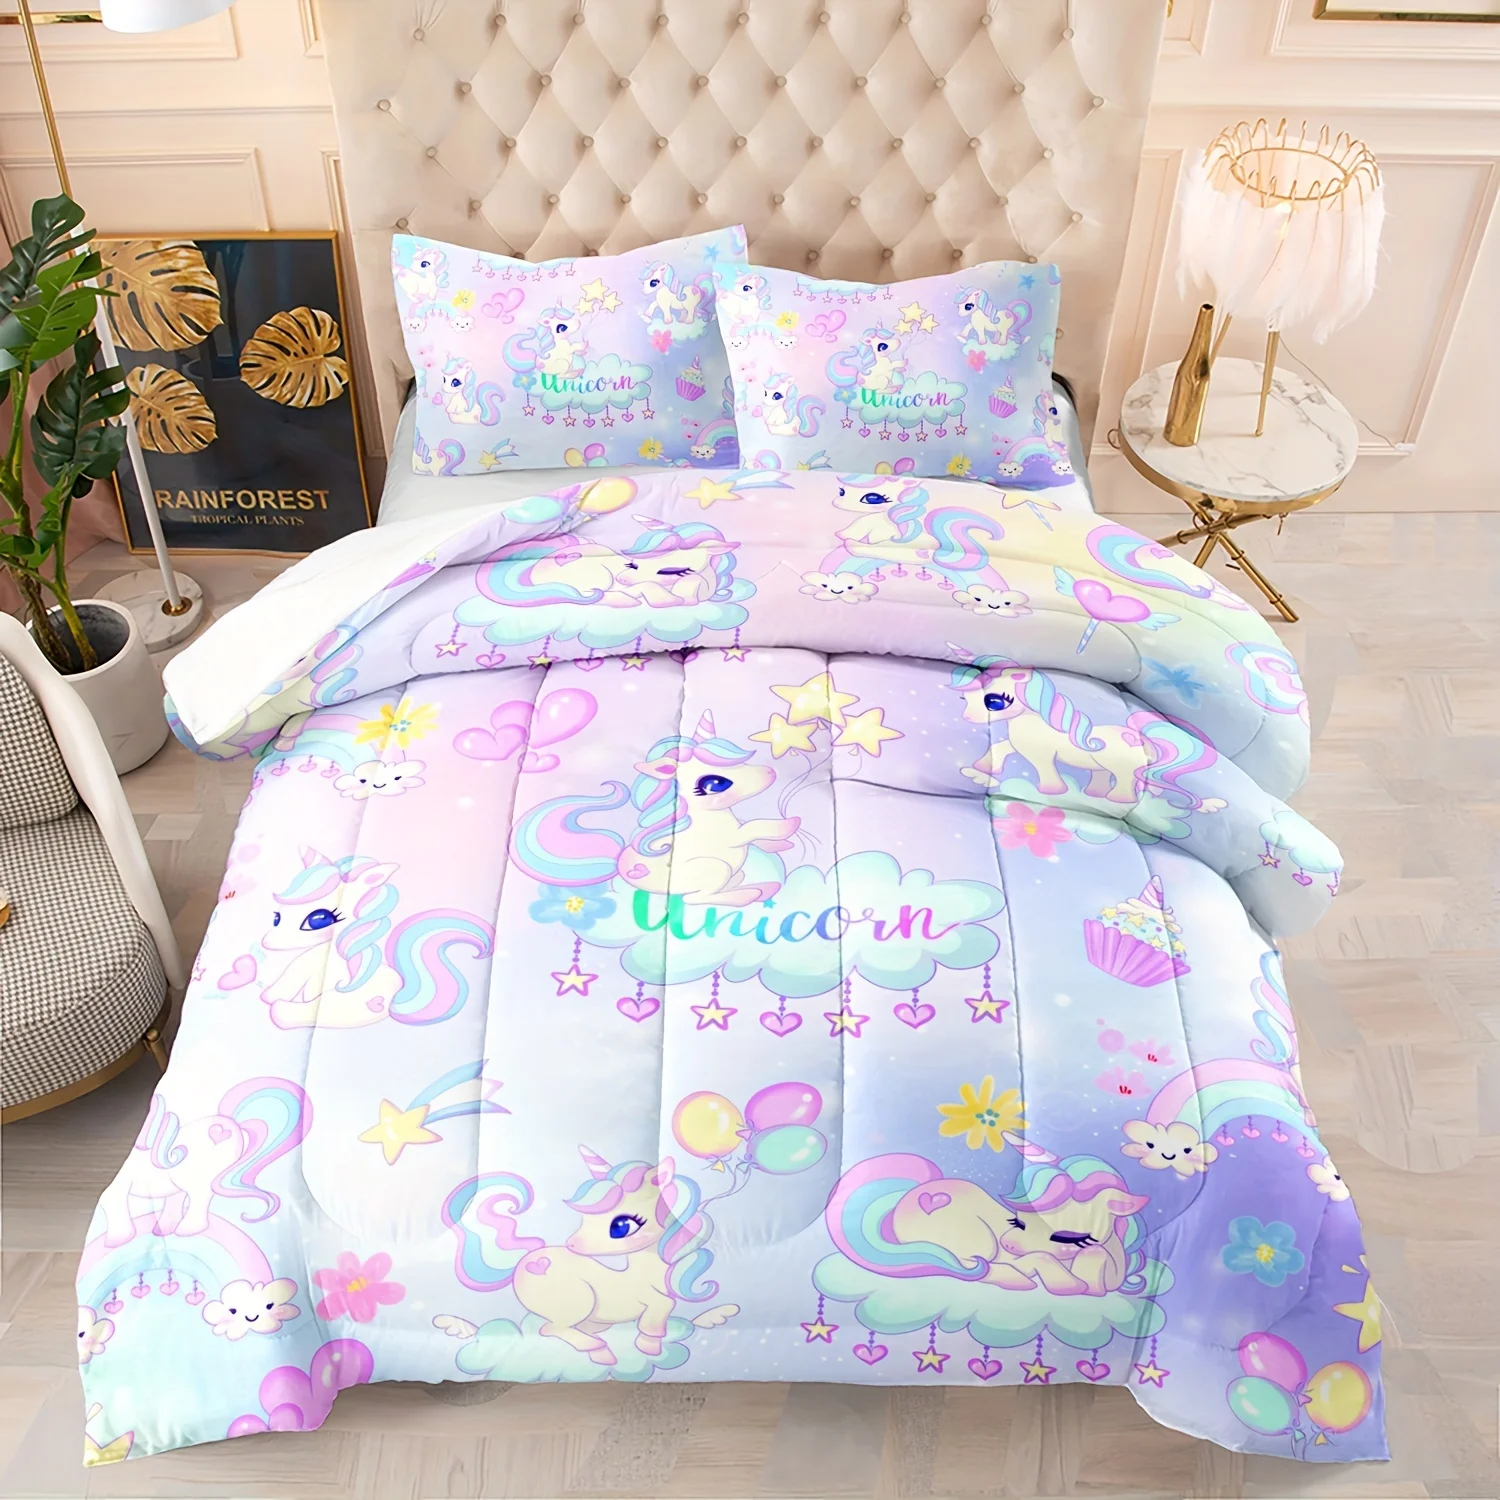 

3Pcs Unicorn Comforter Set White Cloud Star Love Heart Pattern Quilt Balloon Bedding Set for Boys Girls with 1 Comforter and 2 P